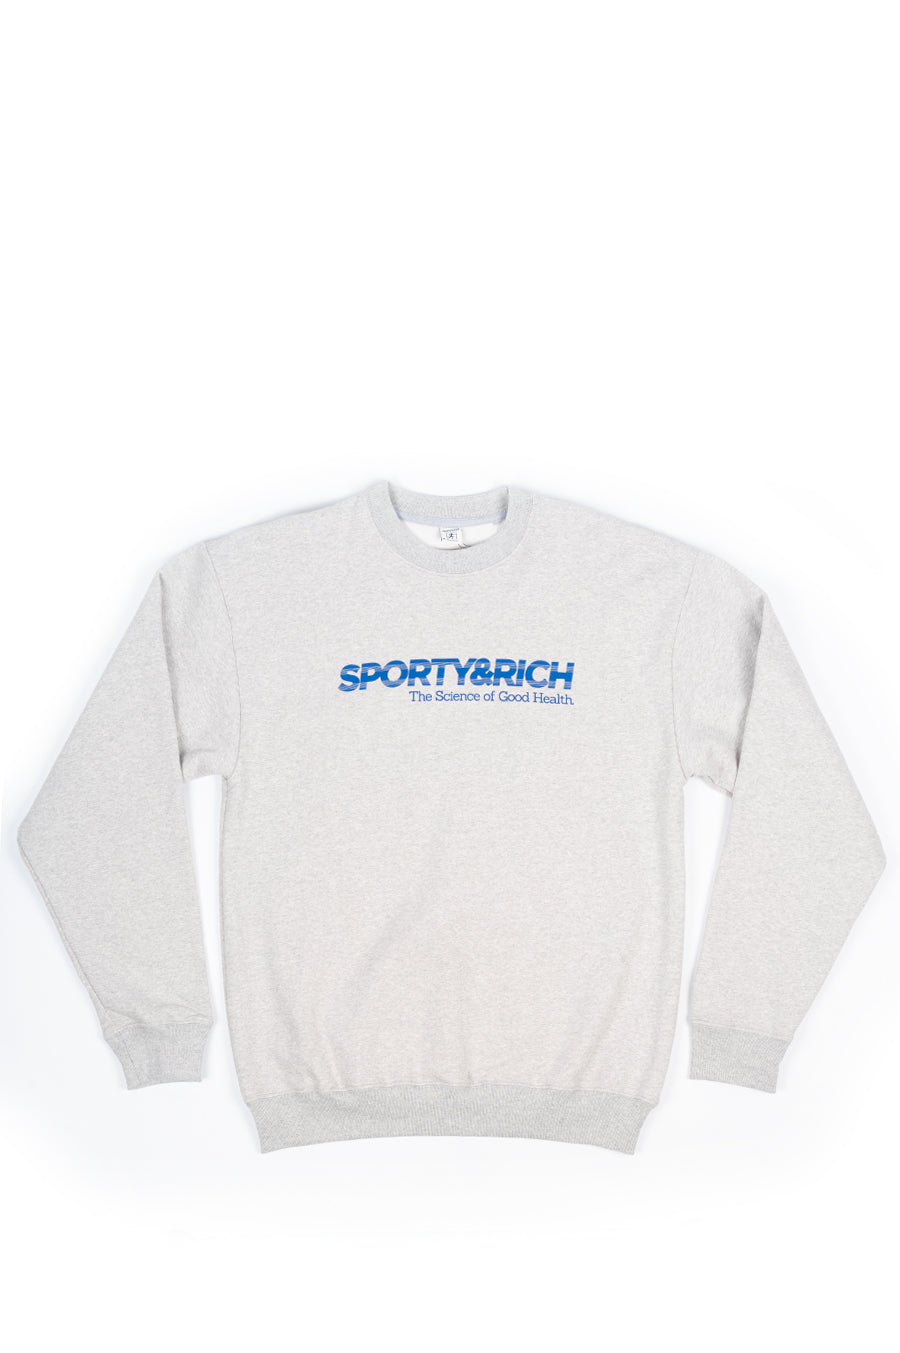 SPORTY AND RICH SCIENCE OF GOOD HEALTH CREWNECK HEATHER GRAY